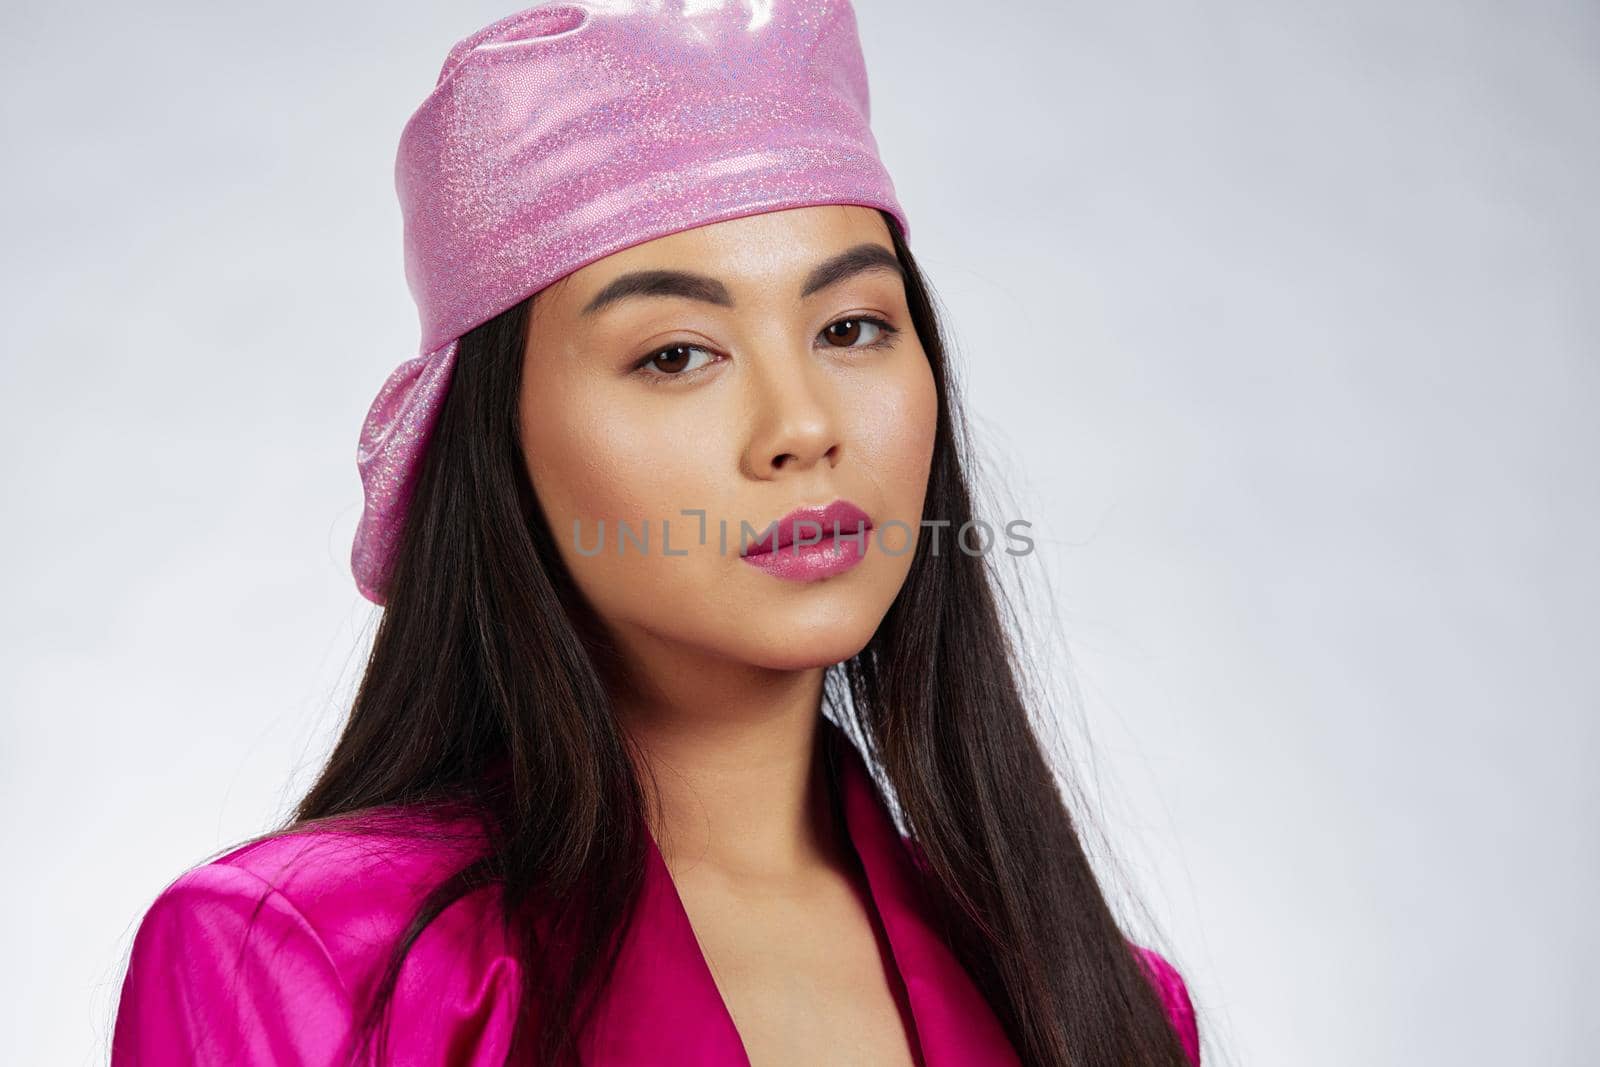 young woman posing pink mini dress charm headscarf Gray background by SHOTPRIME